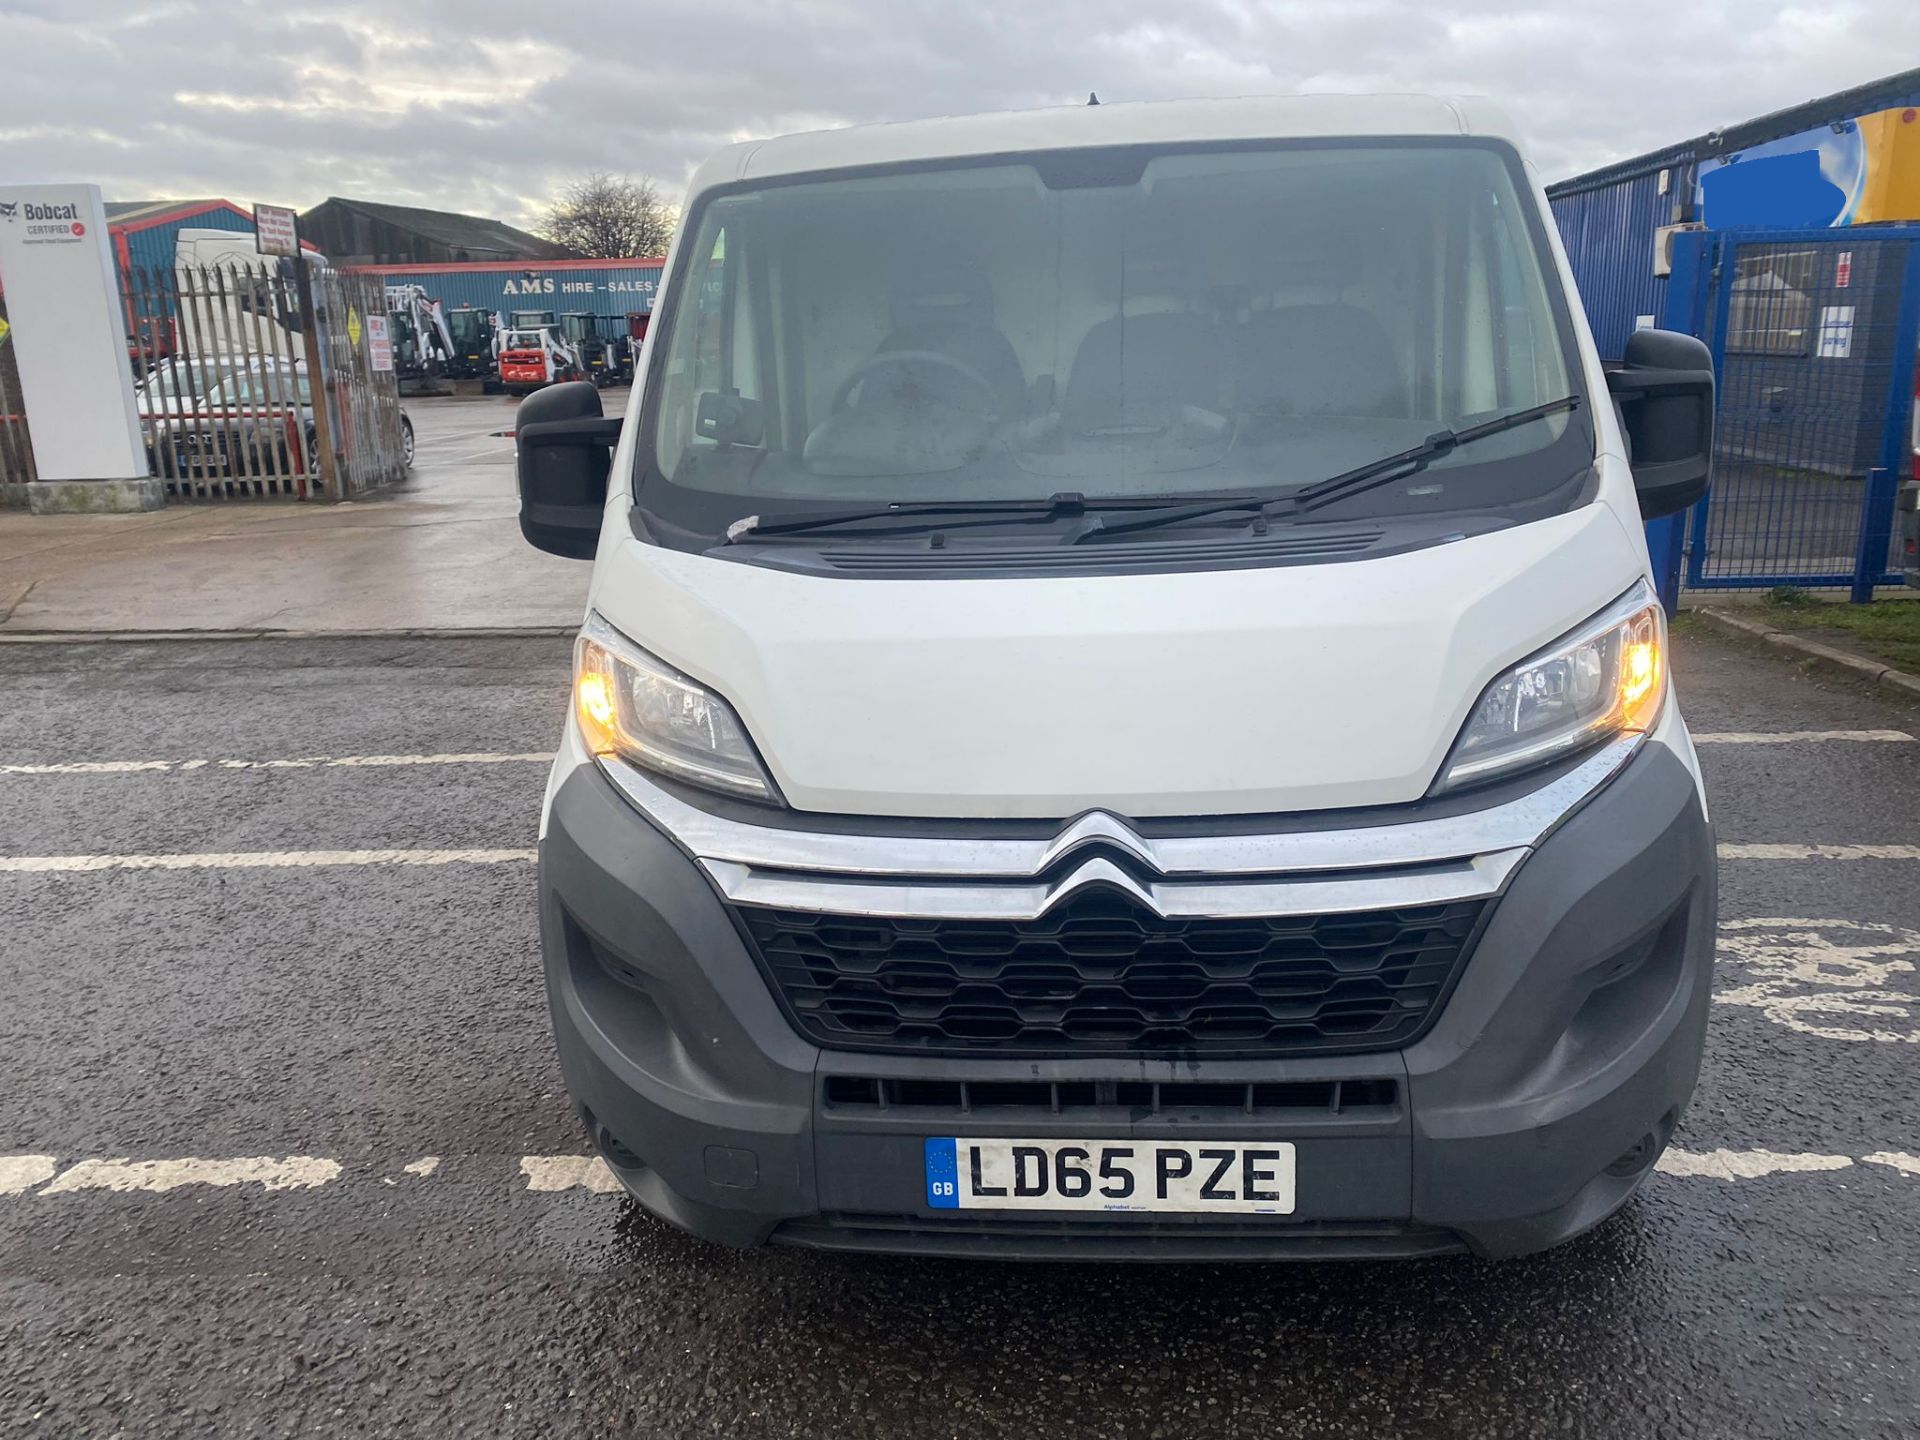 2015 65 Peugeot boxer panel van - 129k miles - tow bar - ply lined - Image 2 of 10